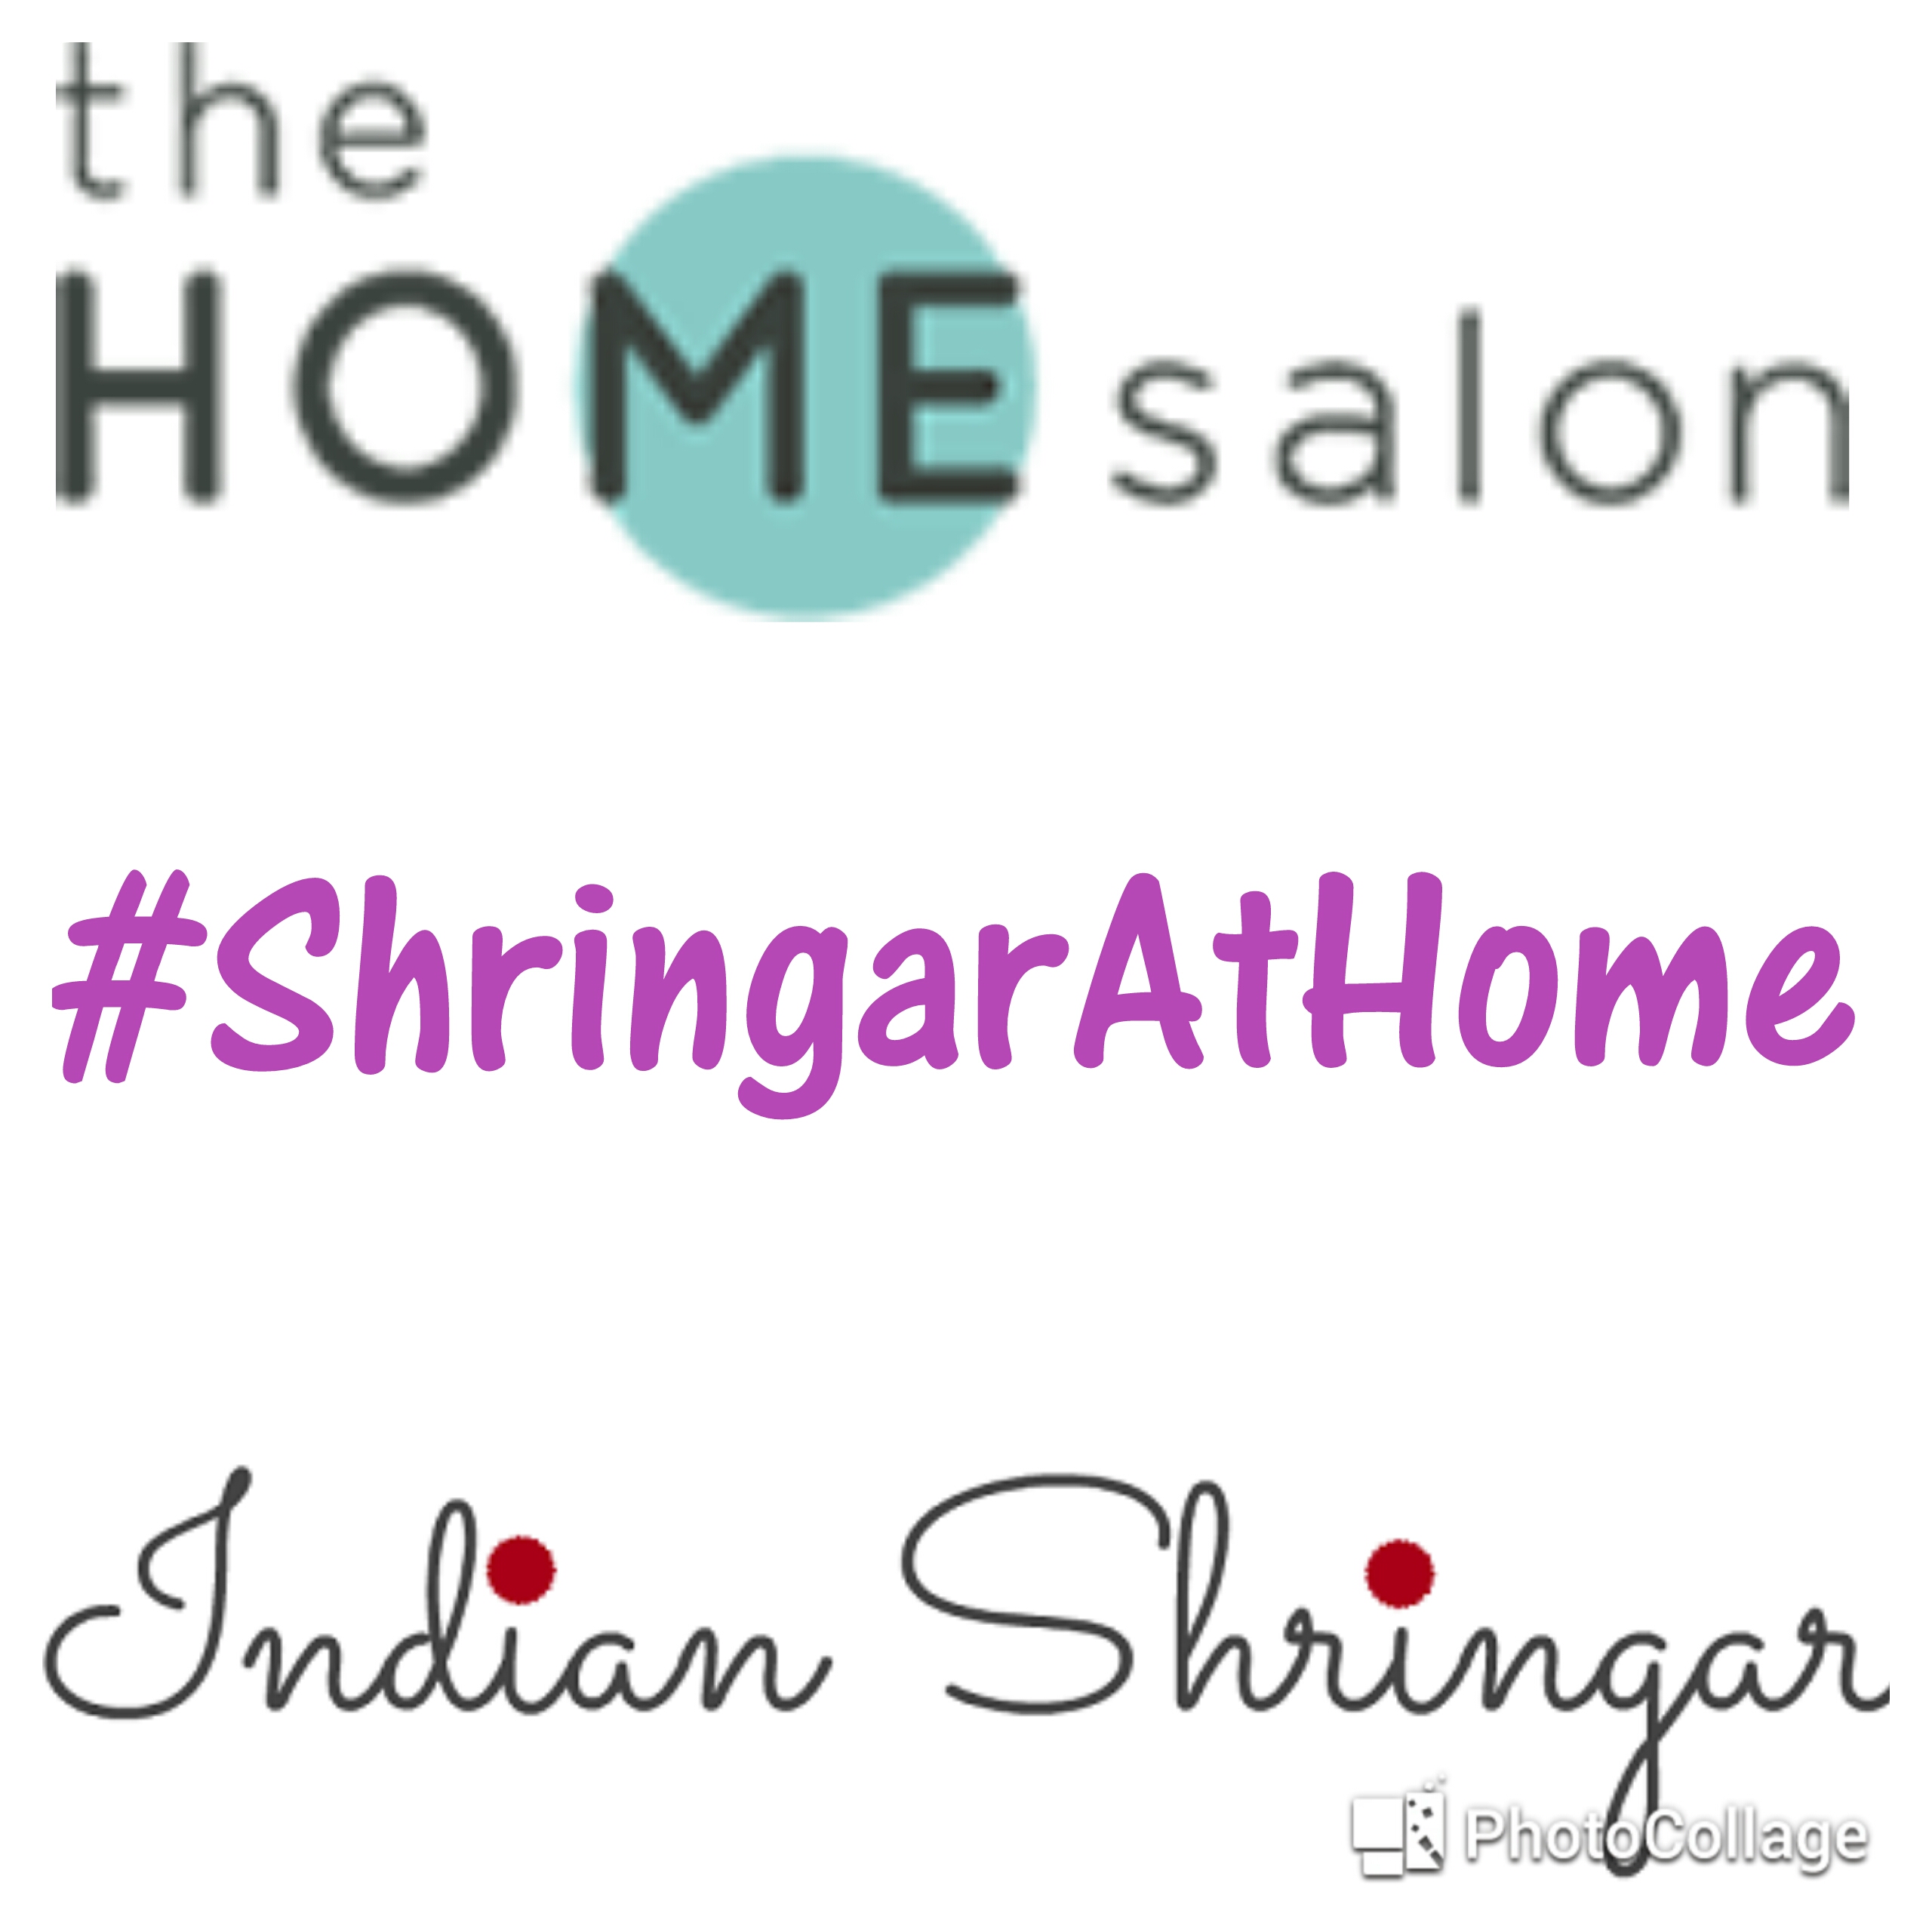 The Home Salon Experience, Review and Giveaway